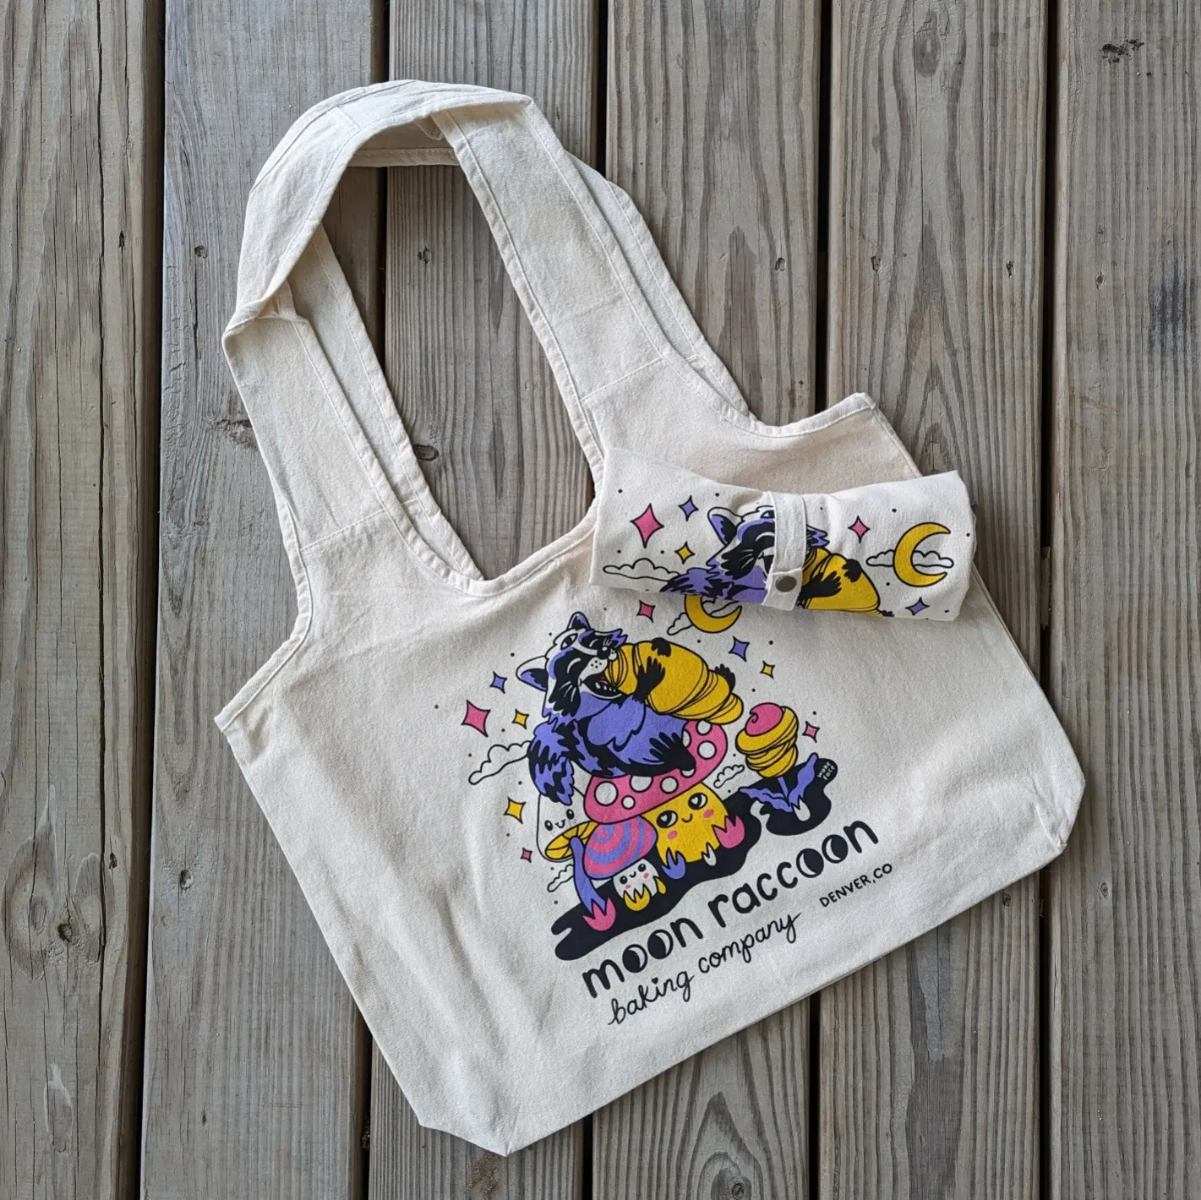 Art Supplies Make Me Happy Tote Bag by the moon and the maker